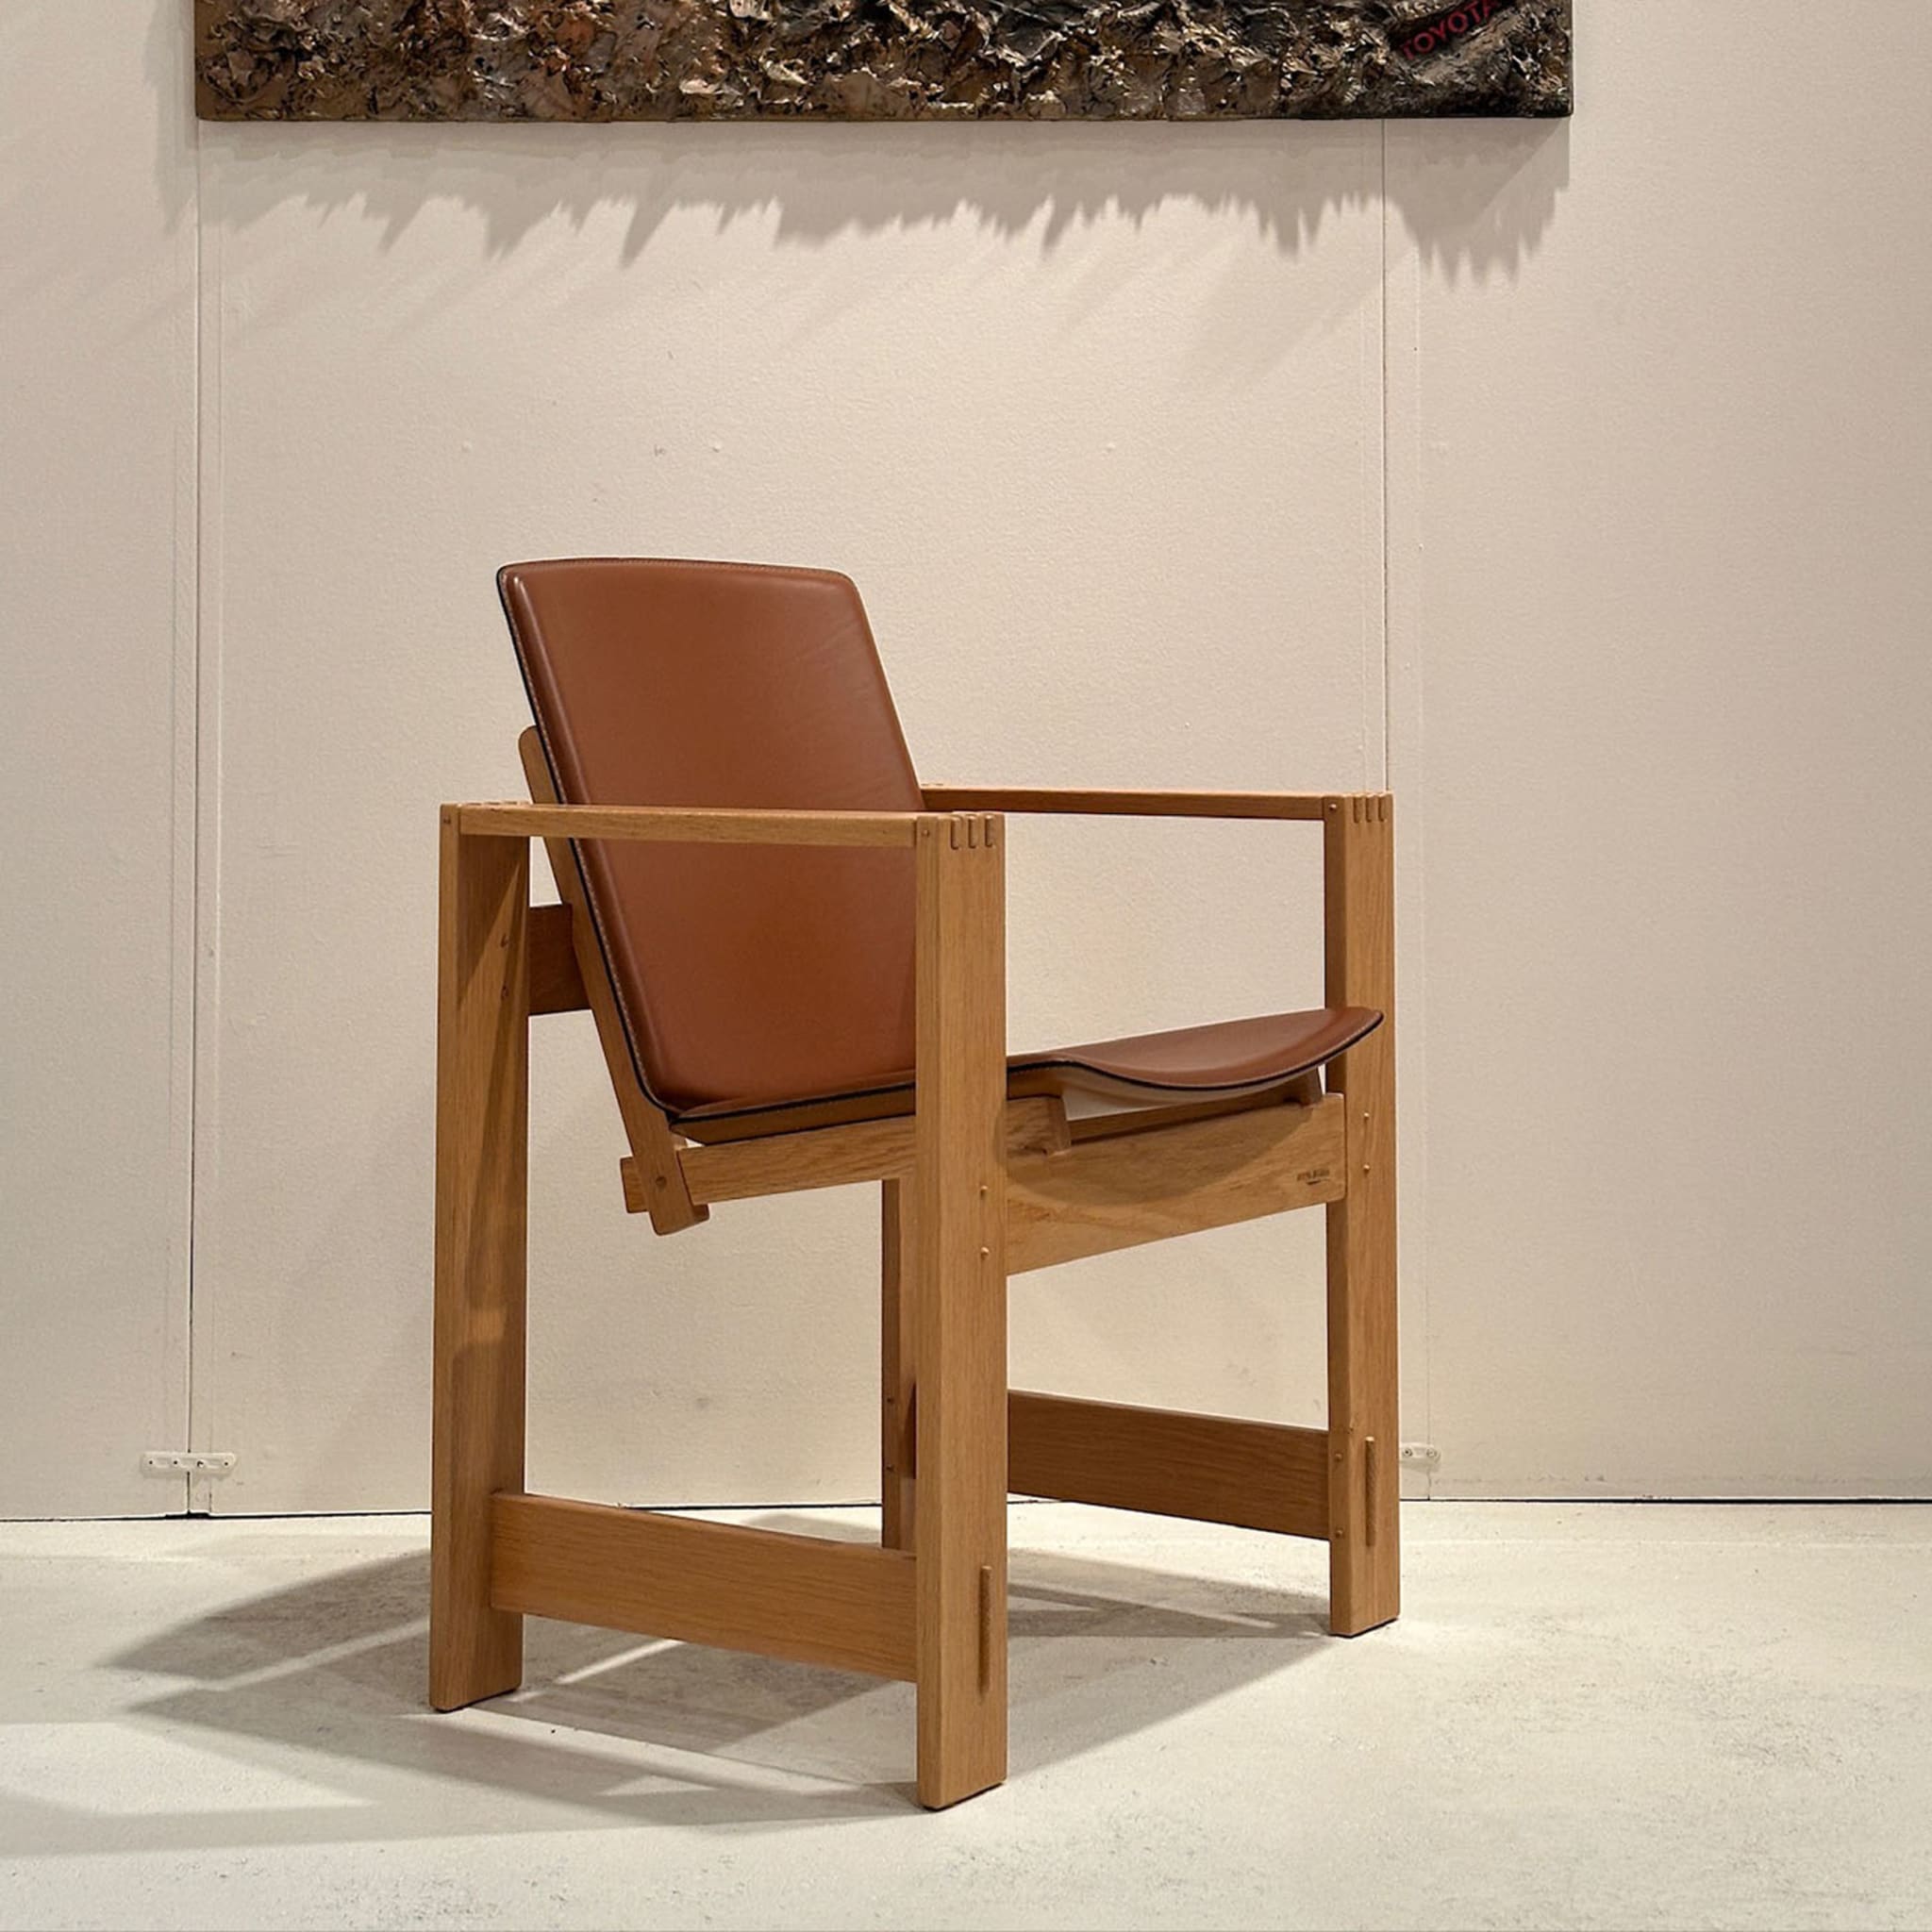 Ambrosetti Durmast and Leather Chair - Alternative view 1